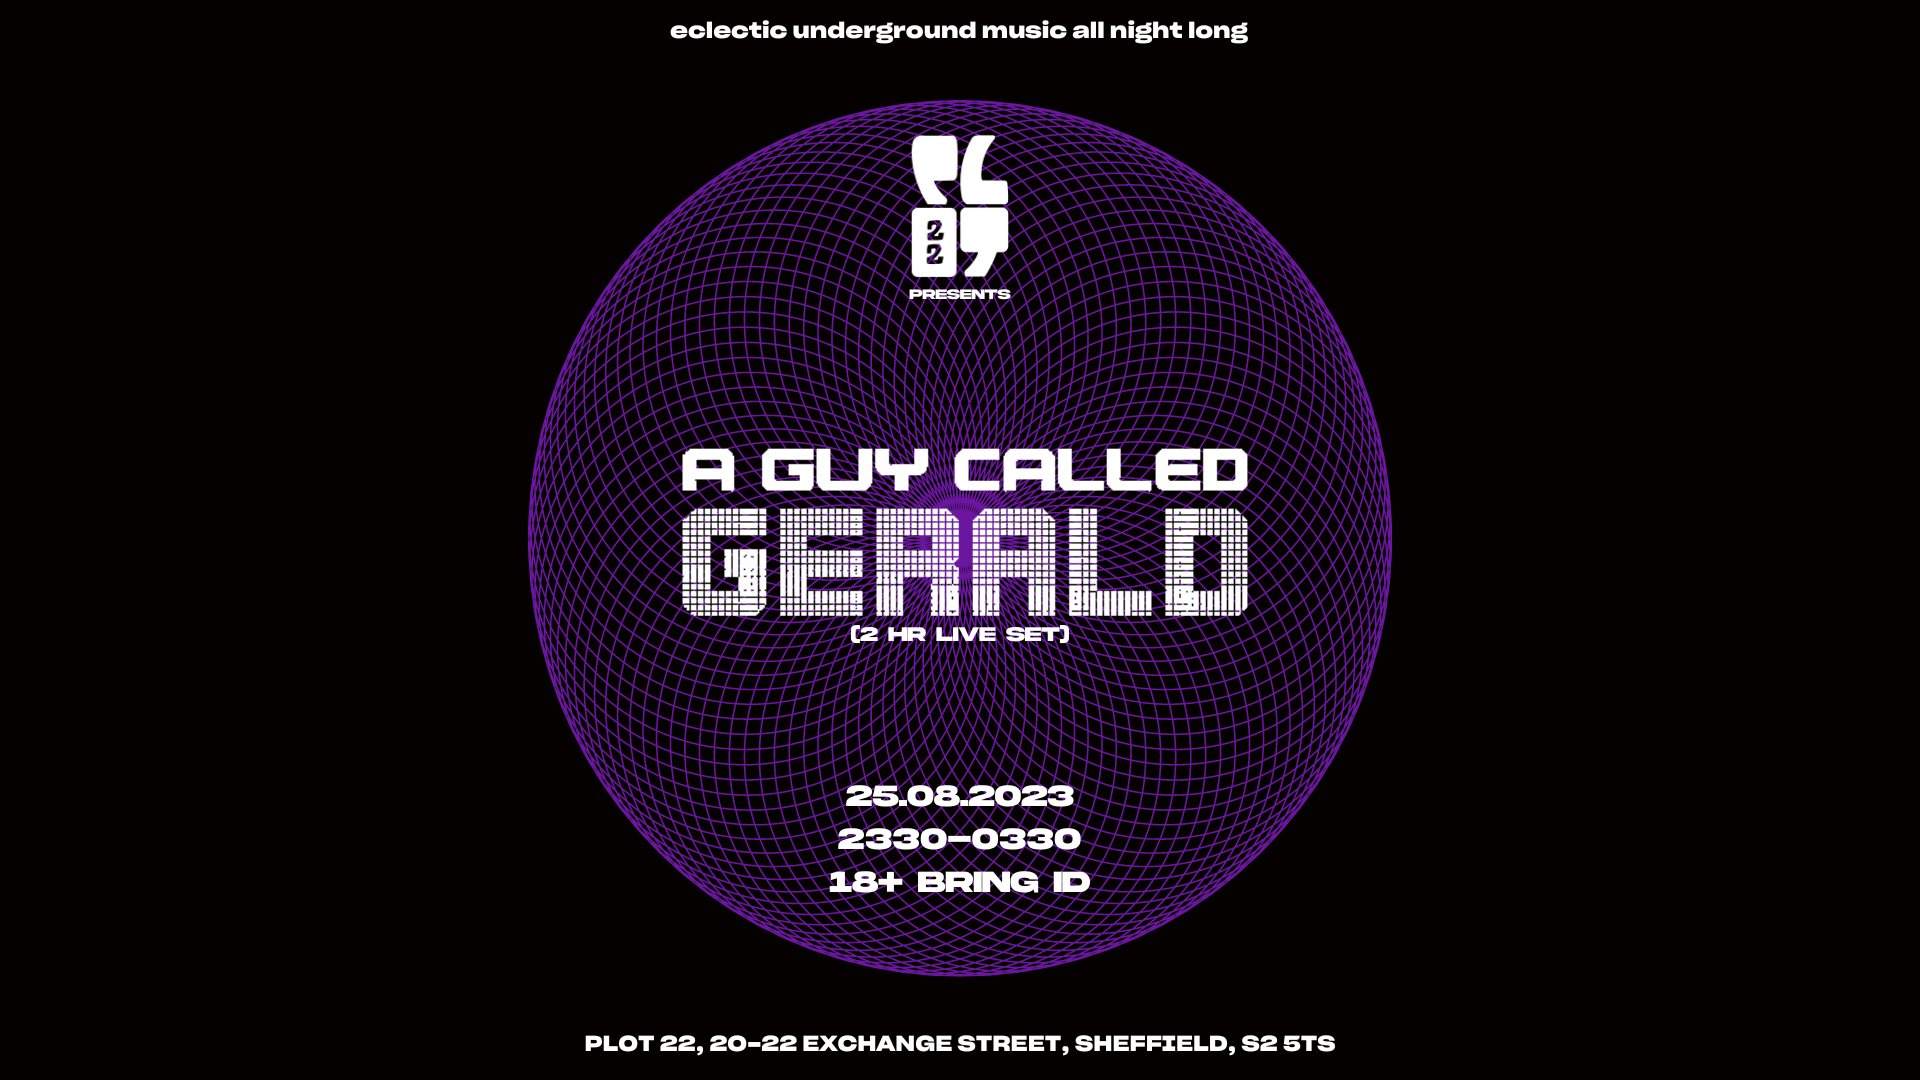 Plot 22 presents: A Guy Called Gerald - フライヤー表